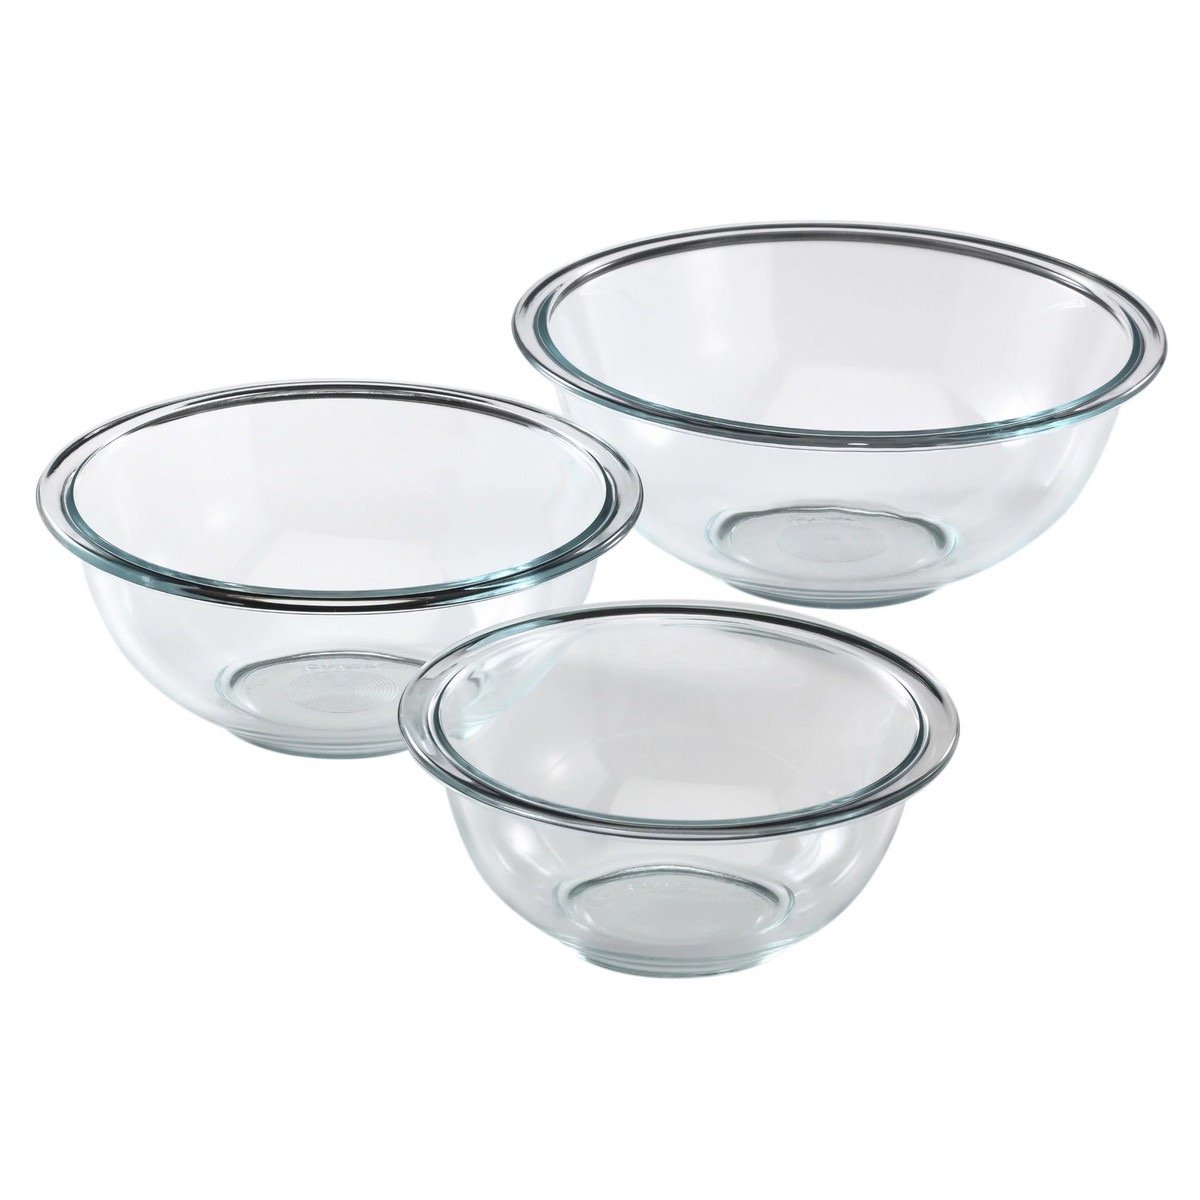 Lead Free Mixing Bowls